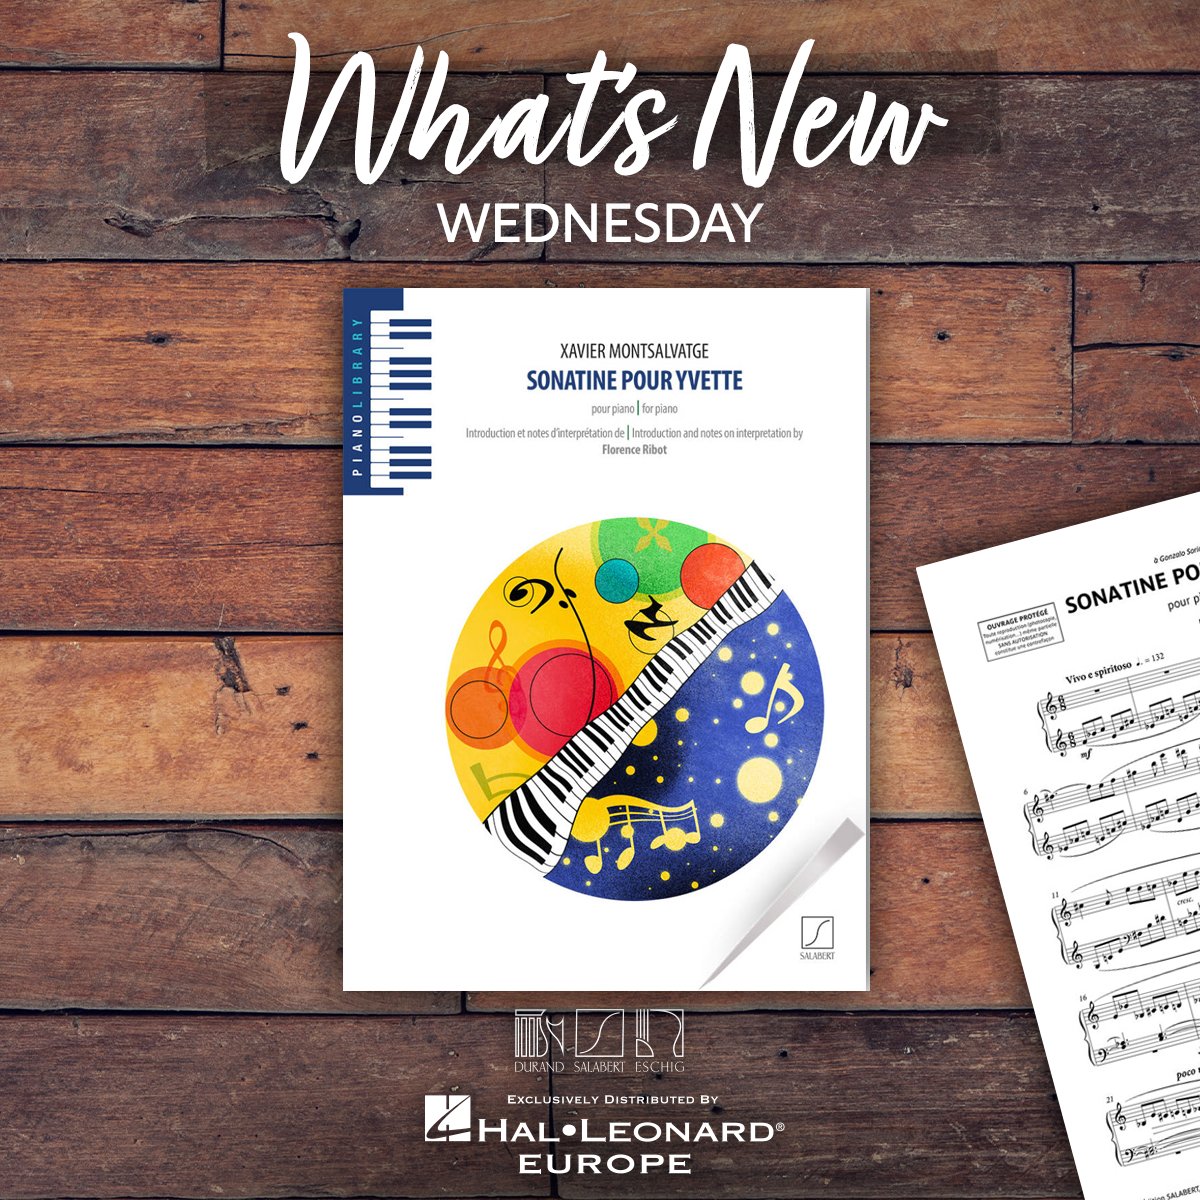 This #WhatsNewWednesday, we’re featuring Xavier Montsalvatge’s charming Sonatine pour Yvette! 

Written for his daughter, learn more about this piece publisher by Éditions Salabert in the image description below 👇